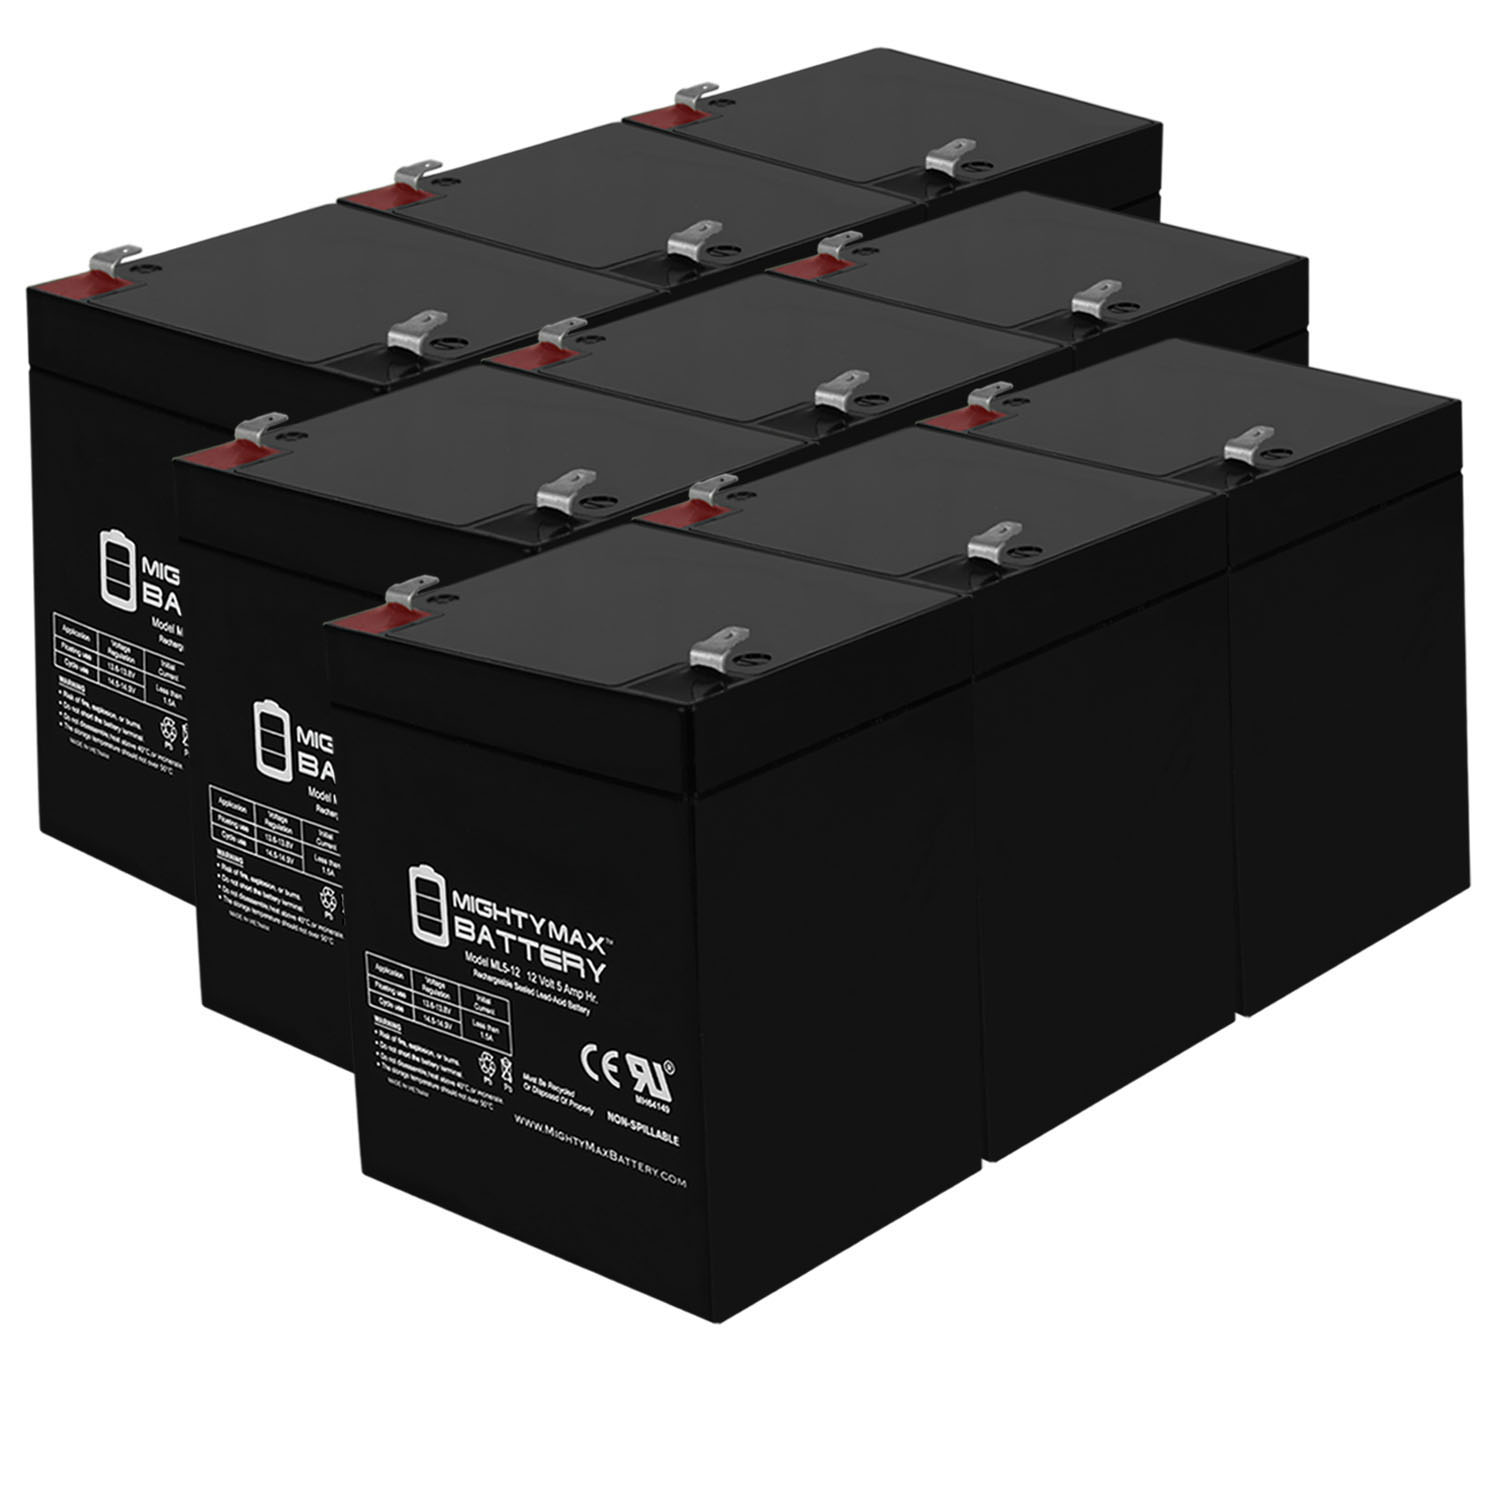 12V 5AH SLA Replacement Battery for GS Portalac PX12050 - 9 Pack